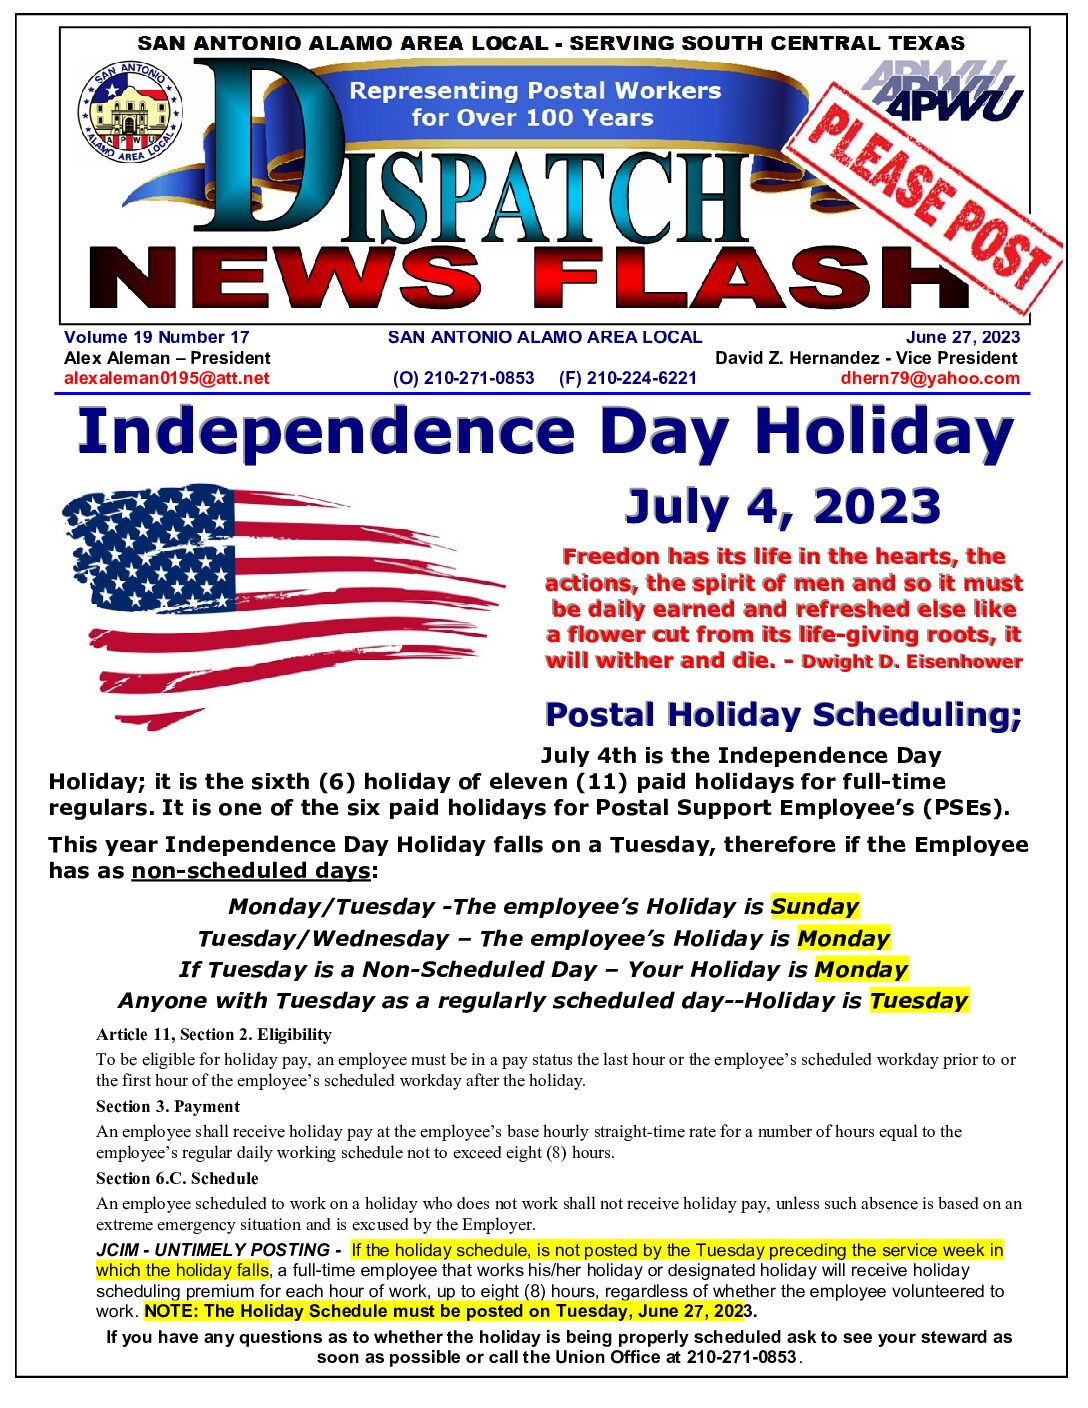 NewsFlash 19-17 July 4th Holiday Scheduling - 